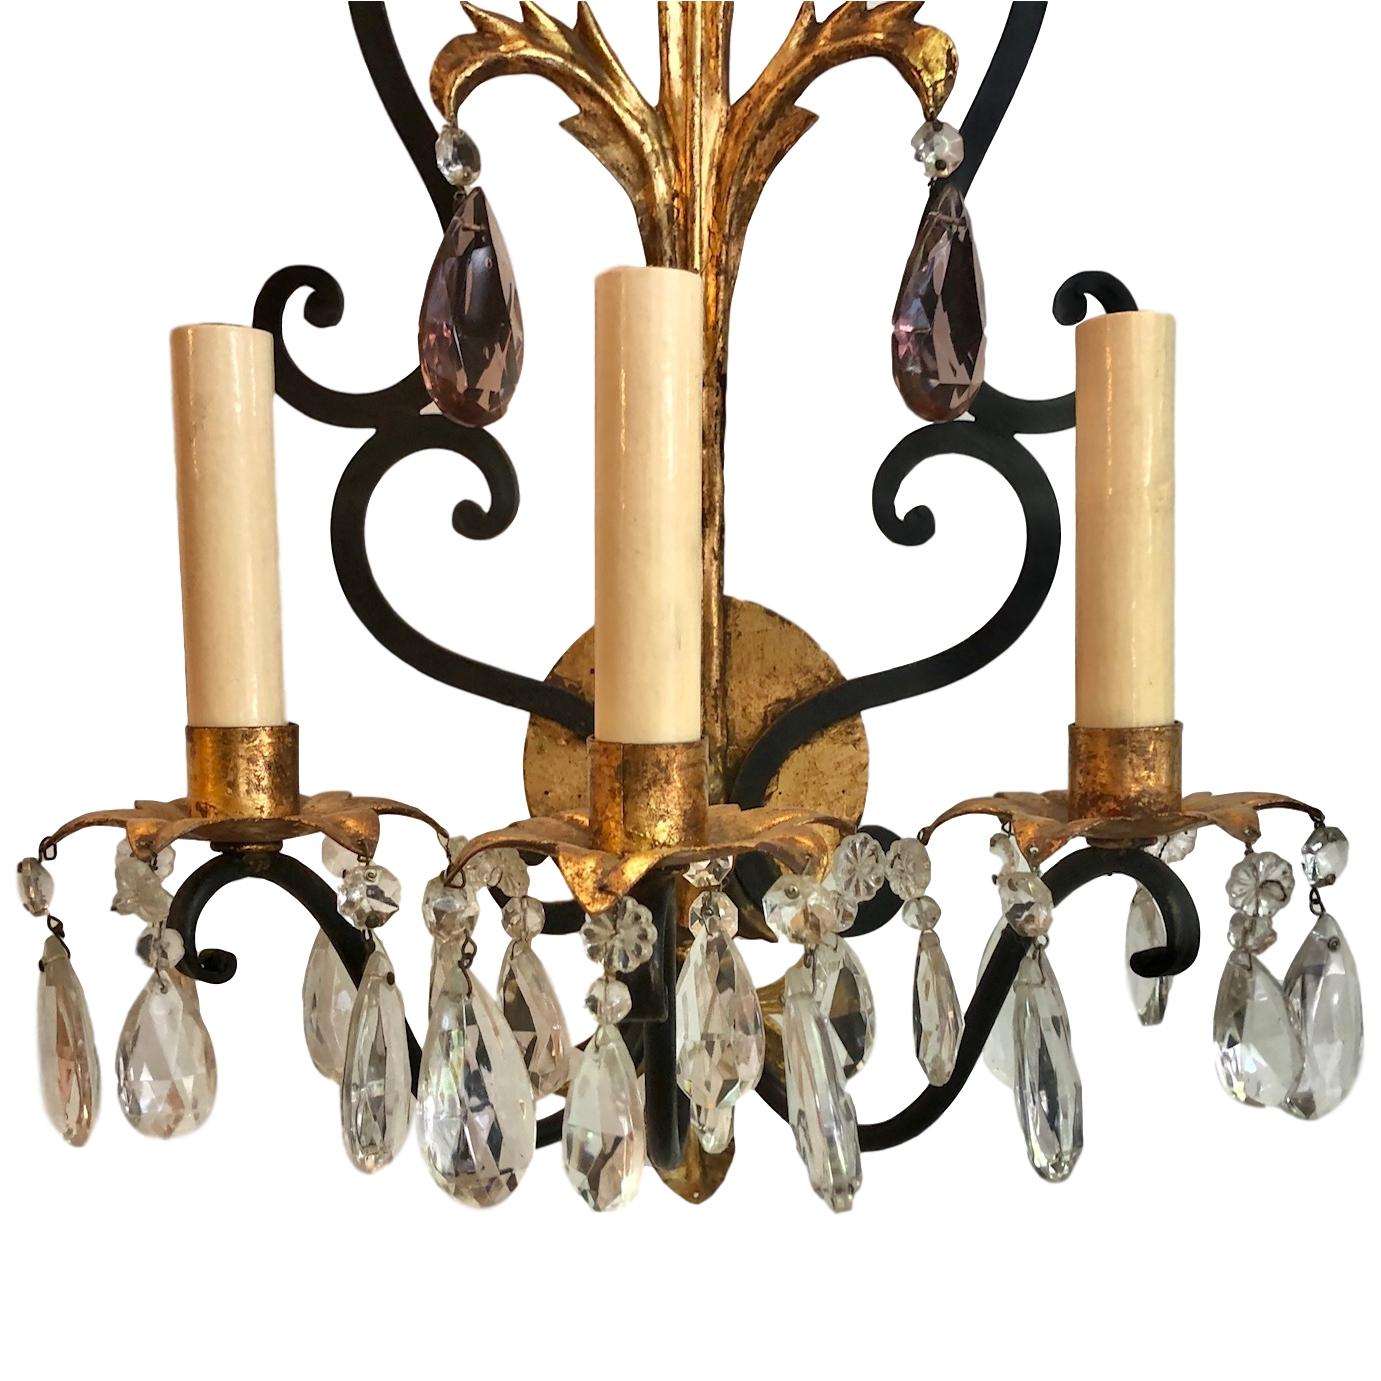 Pair of circa 1930’s French wrought iron sconces with gilt details and with amethyst crystal drops.

Measurements:
Height: 24″
Depth: 9″
Width: 12″